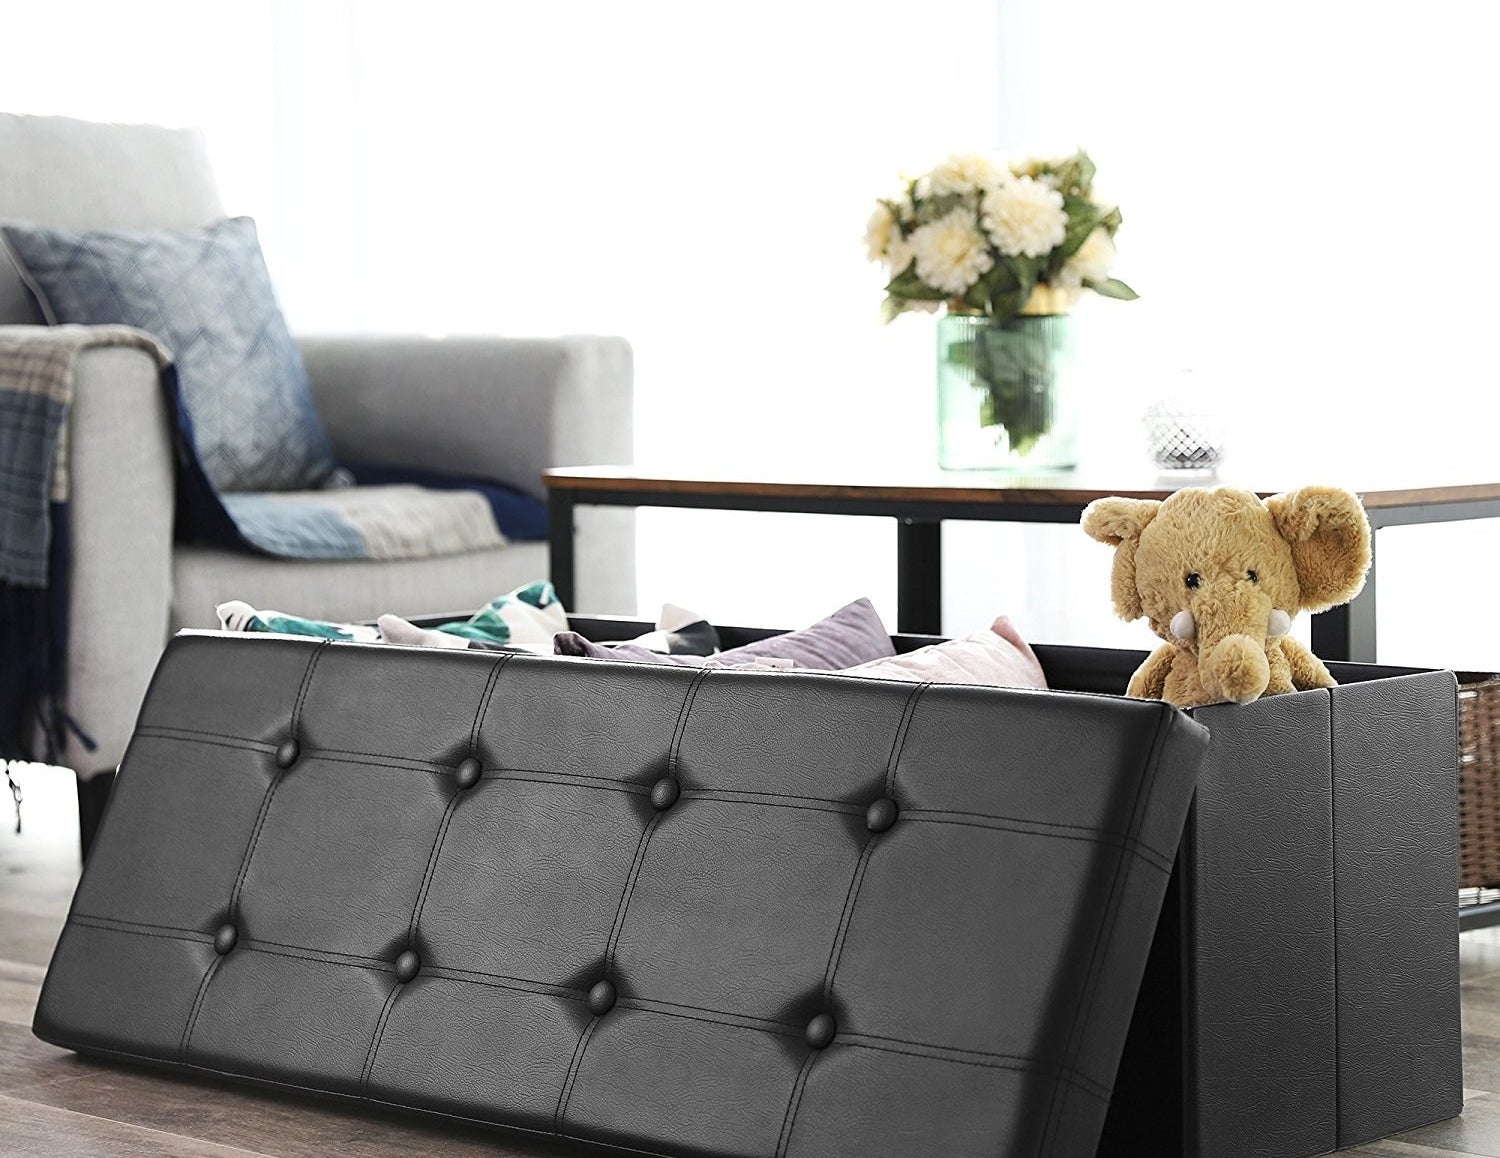 The storage bench in black with the tufted lid on the side of it to show that it is filled with toys and pillows